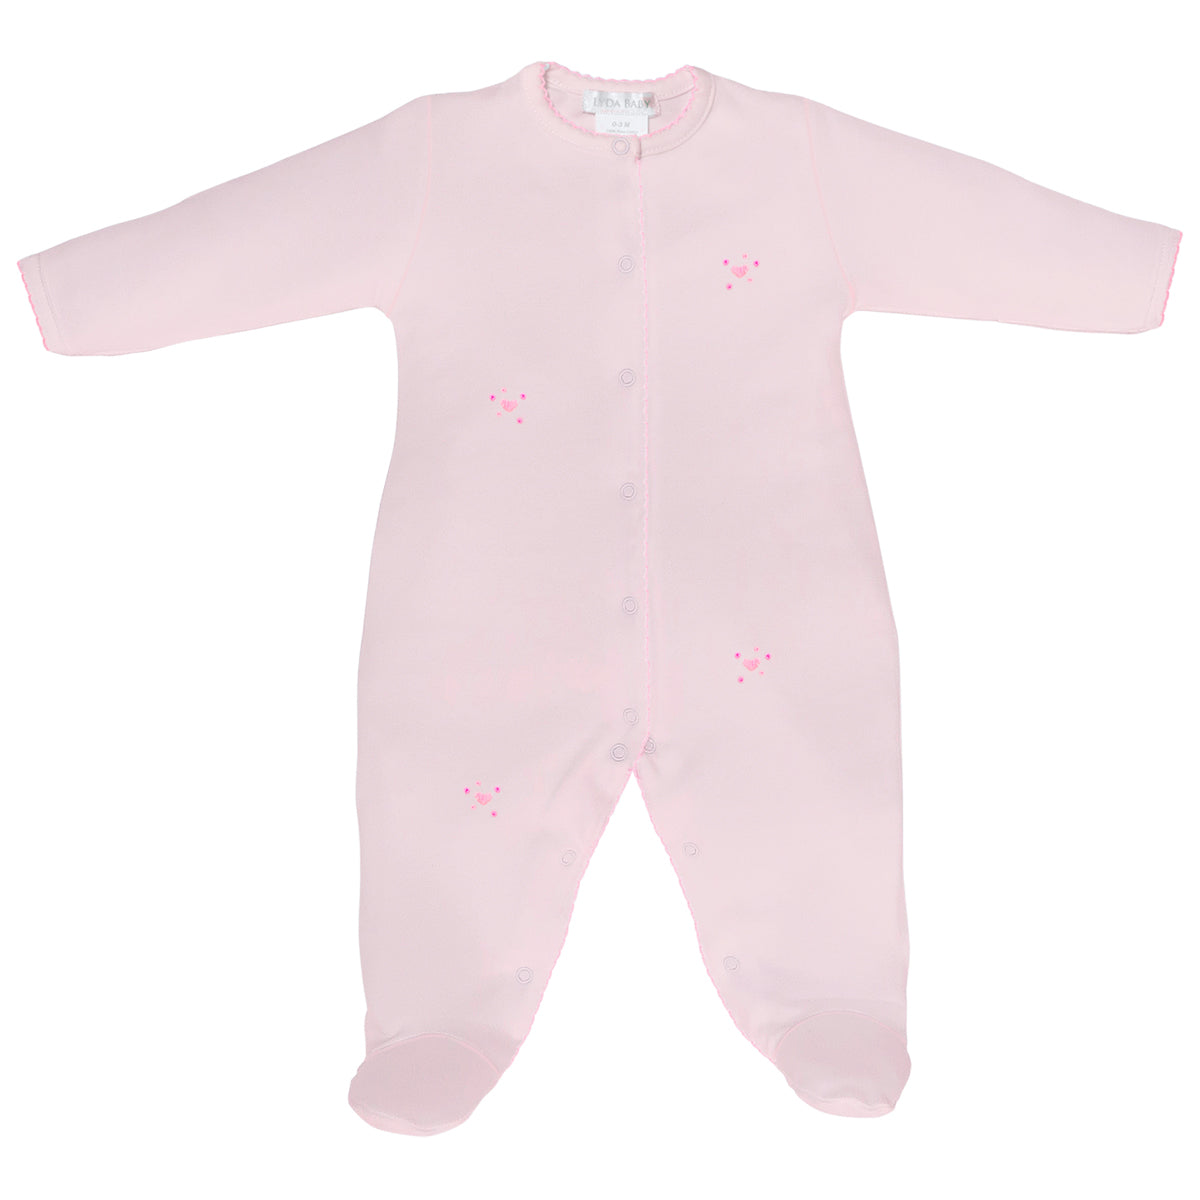 PIMA COTTON-PINK BUBBLE HEARTS EMBROIDERY FOOTIE